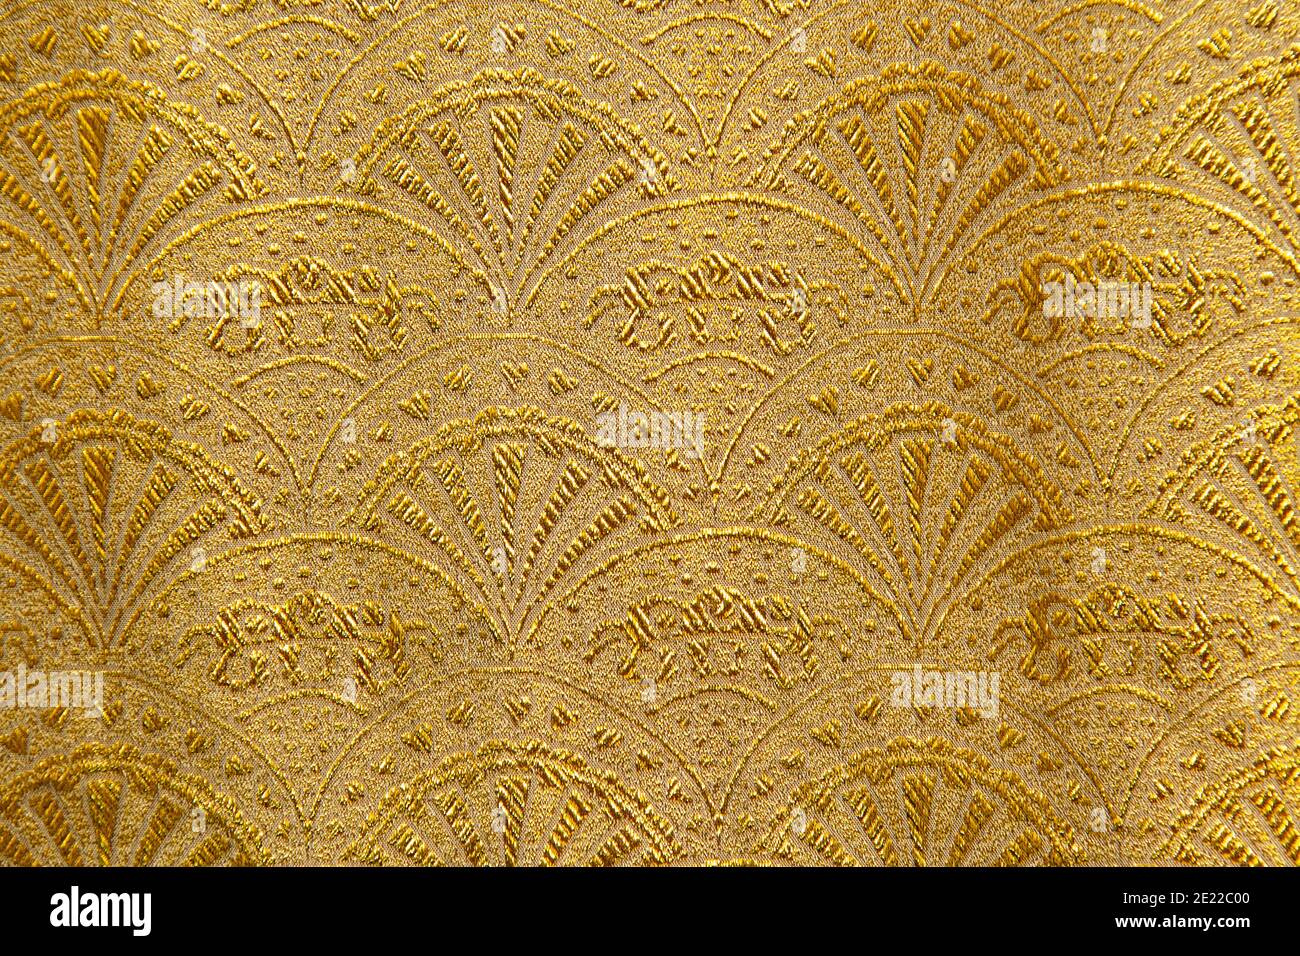 Gold floral ornament brocade textile pattern, beautiful expensive fabric background. Stock Photo